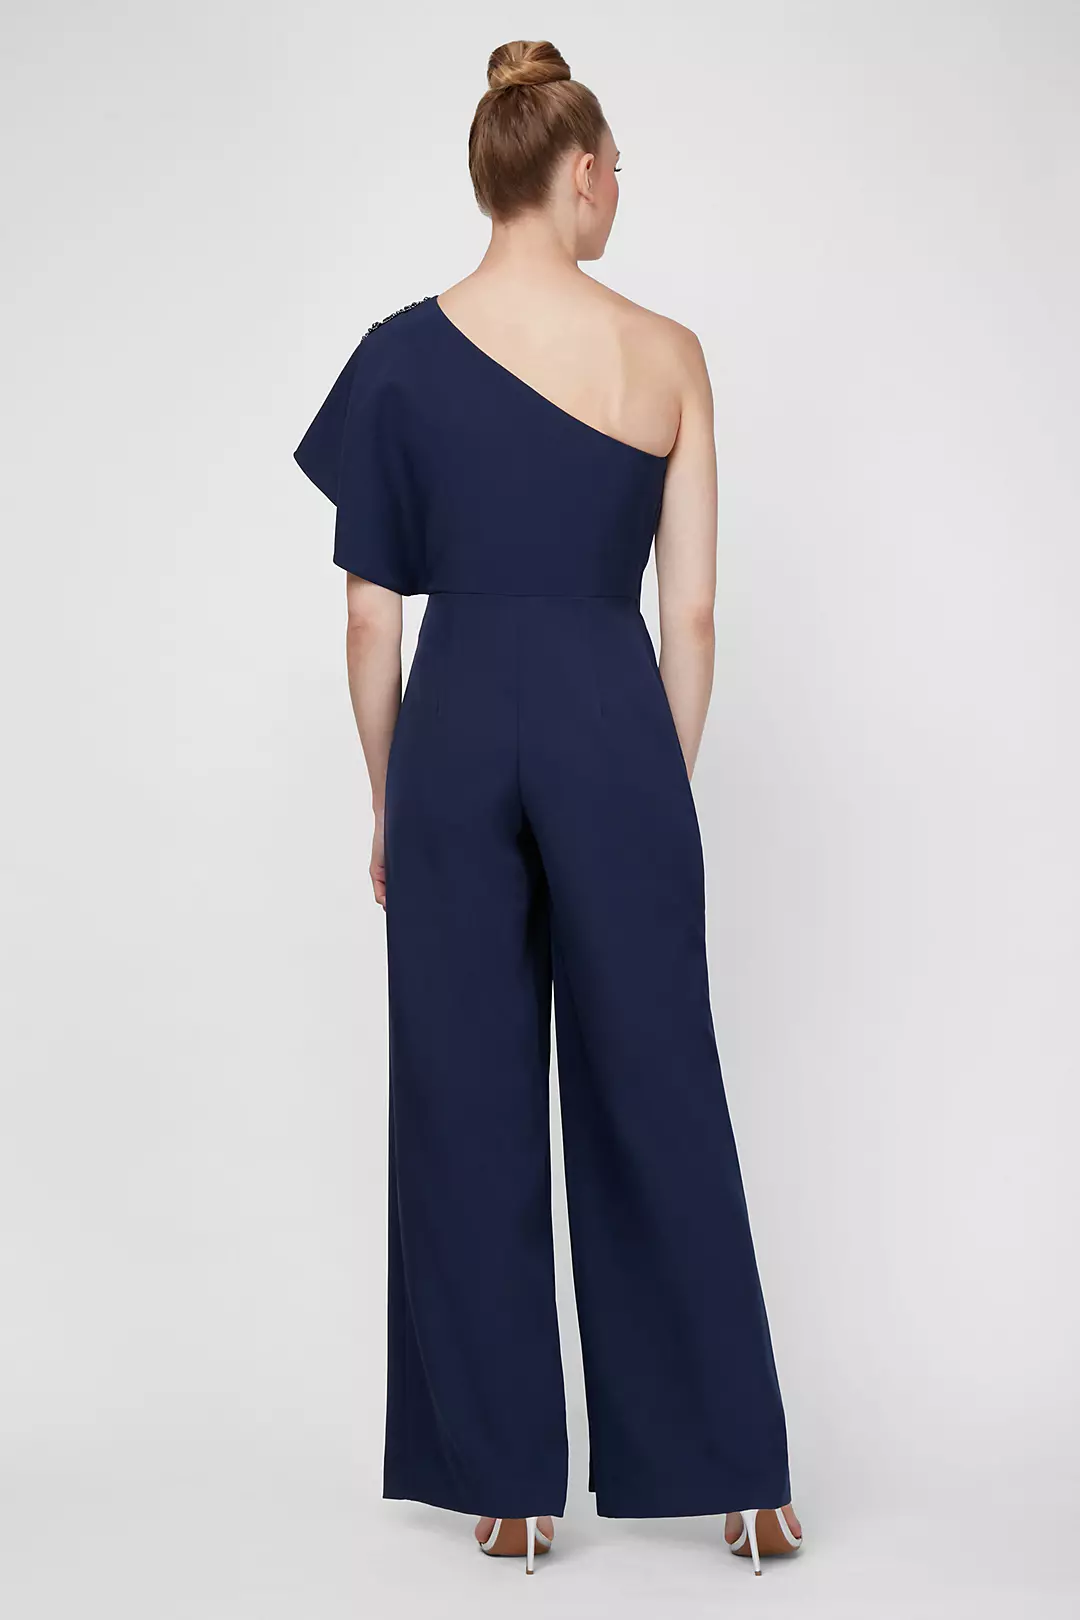 Beaded One-Shoulder Jumpsuit with Chiffon Overlay Image 2